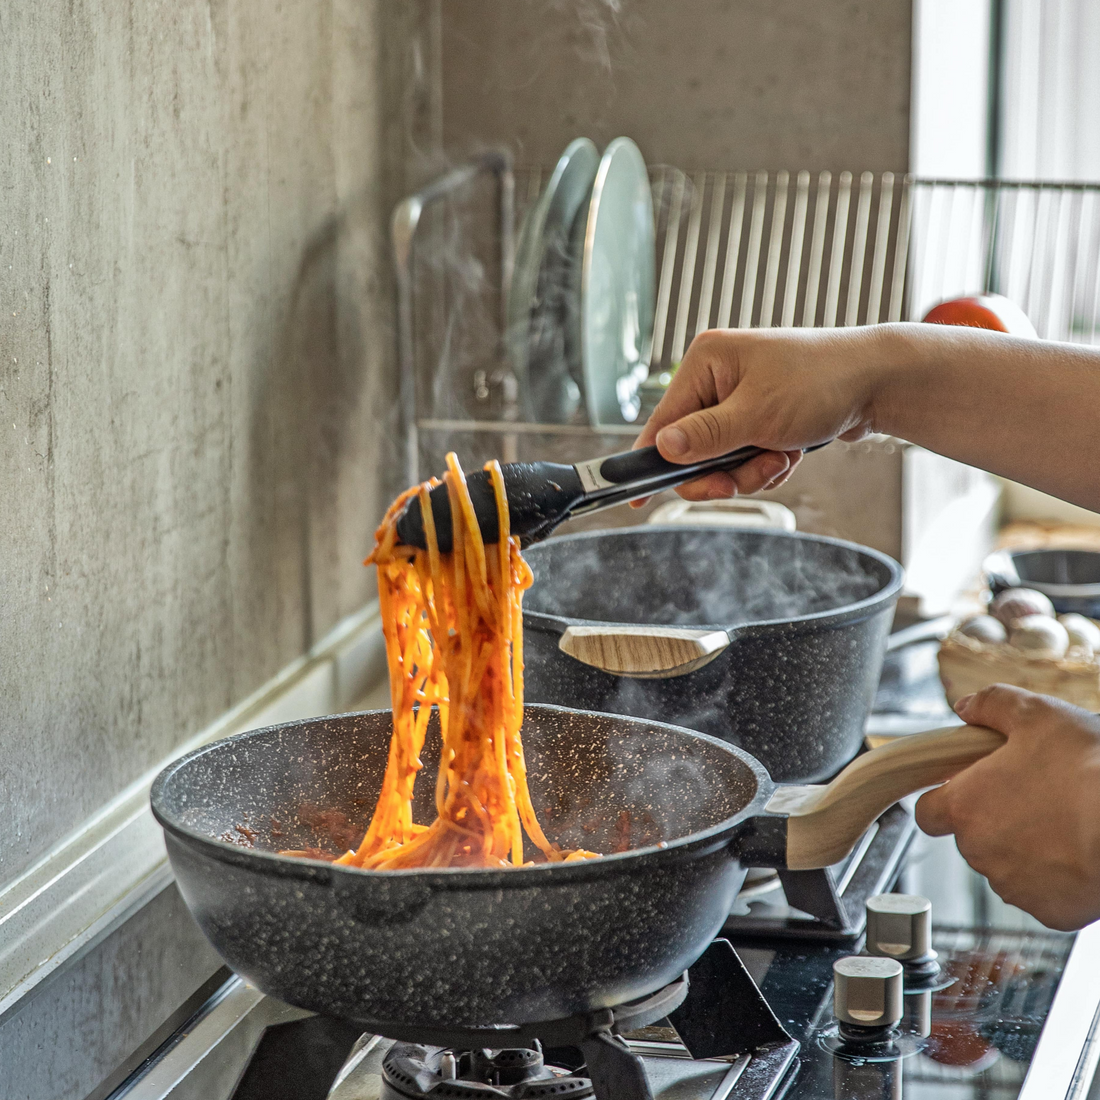 Granite vs Ceramic Frying Pans: Which is the Best for Your Kitchen?! 